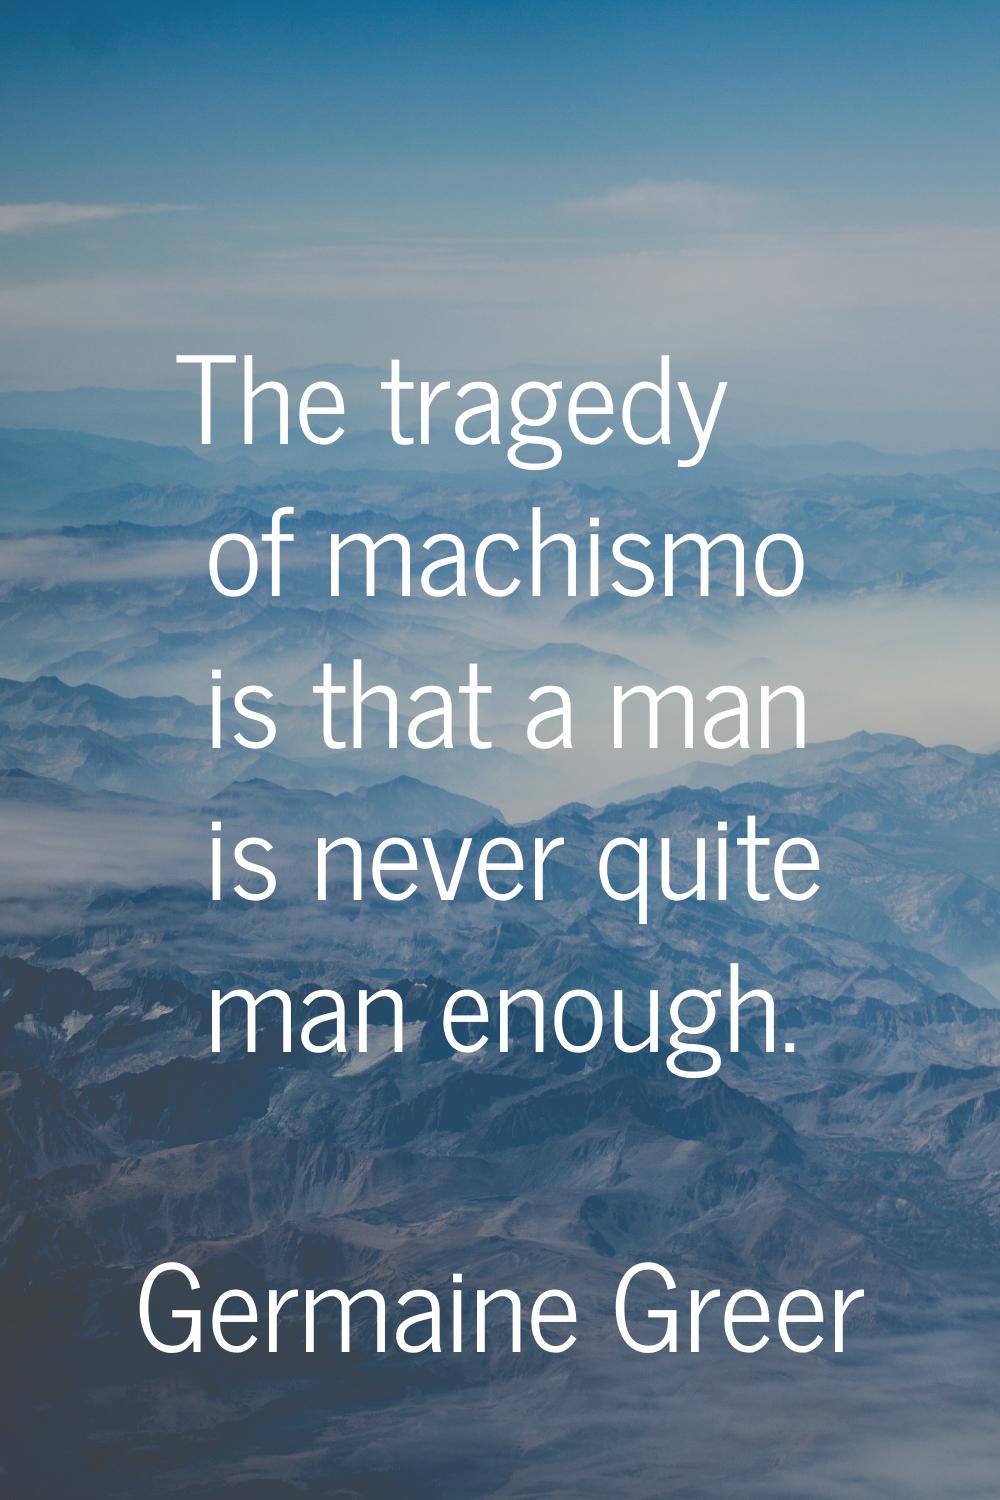 The tragedy of machismo is that a man is never quite man enough.